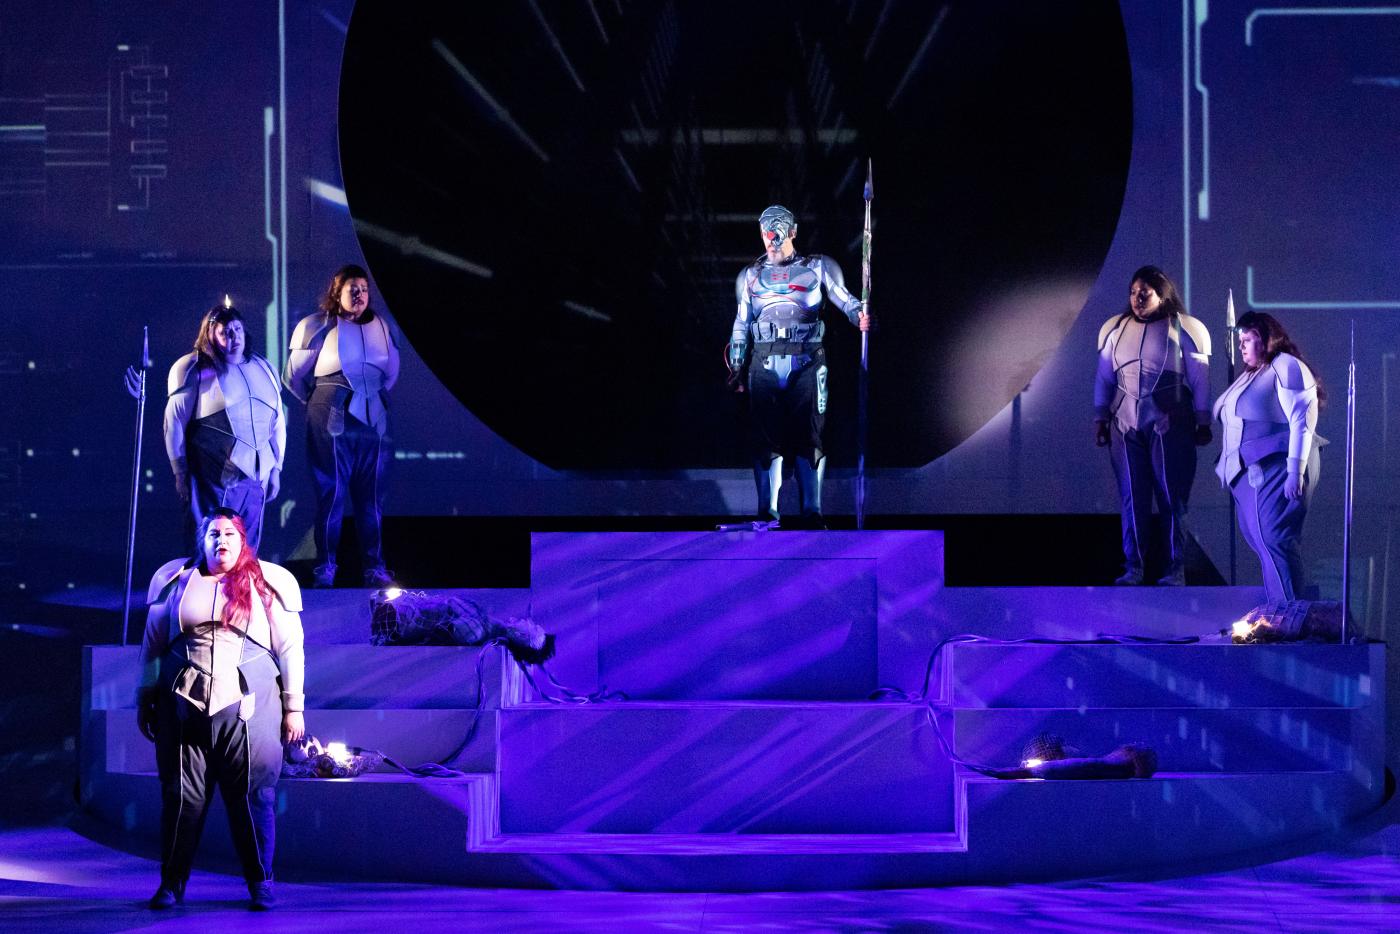 Virginia Opera's production of The Valkyrie